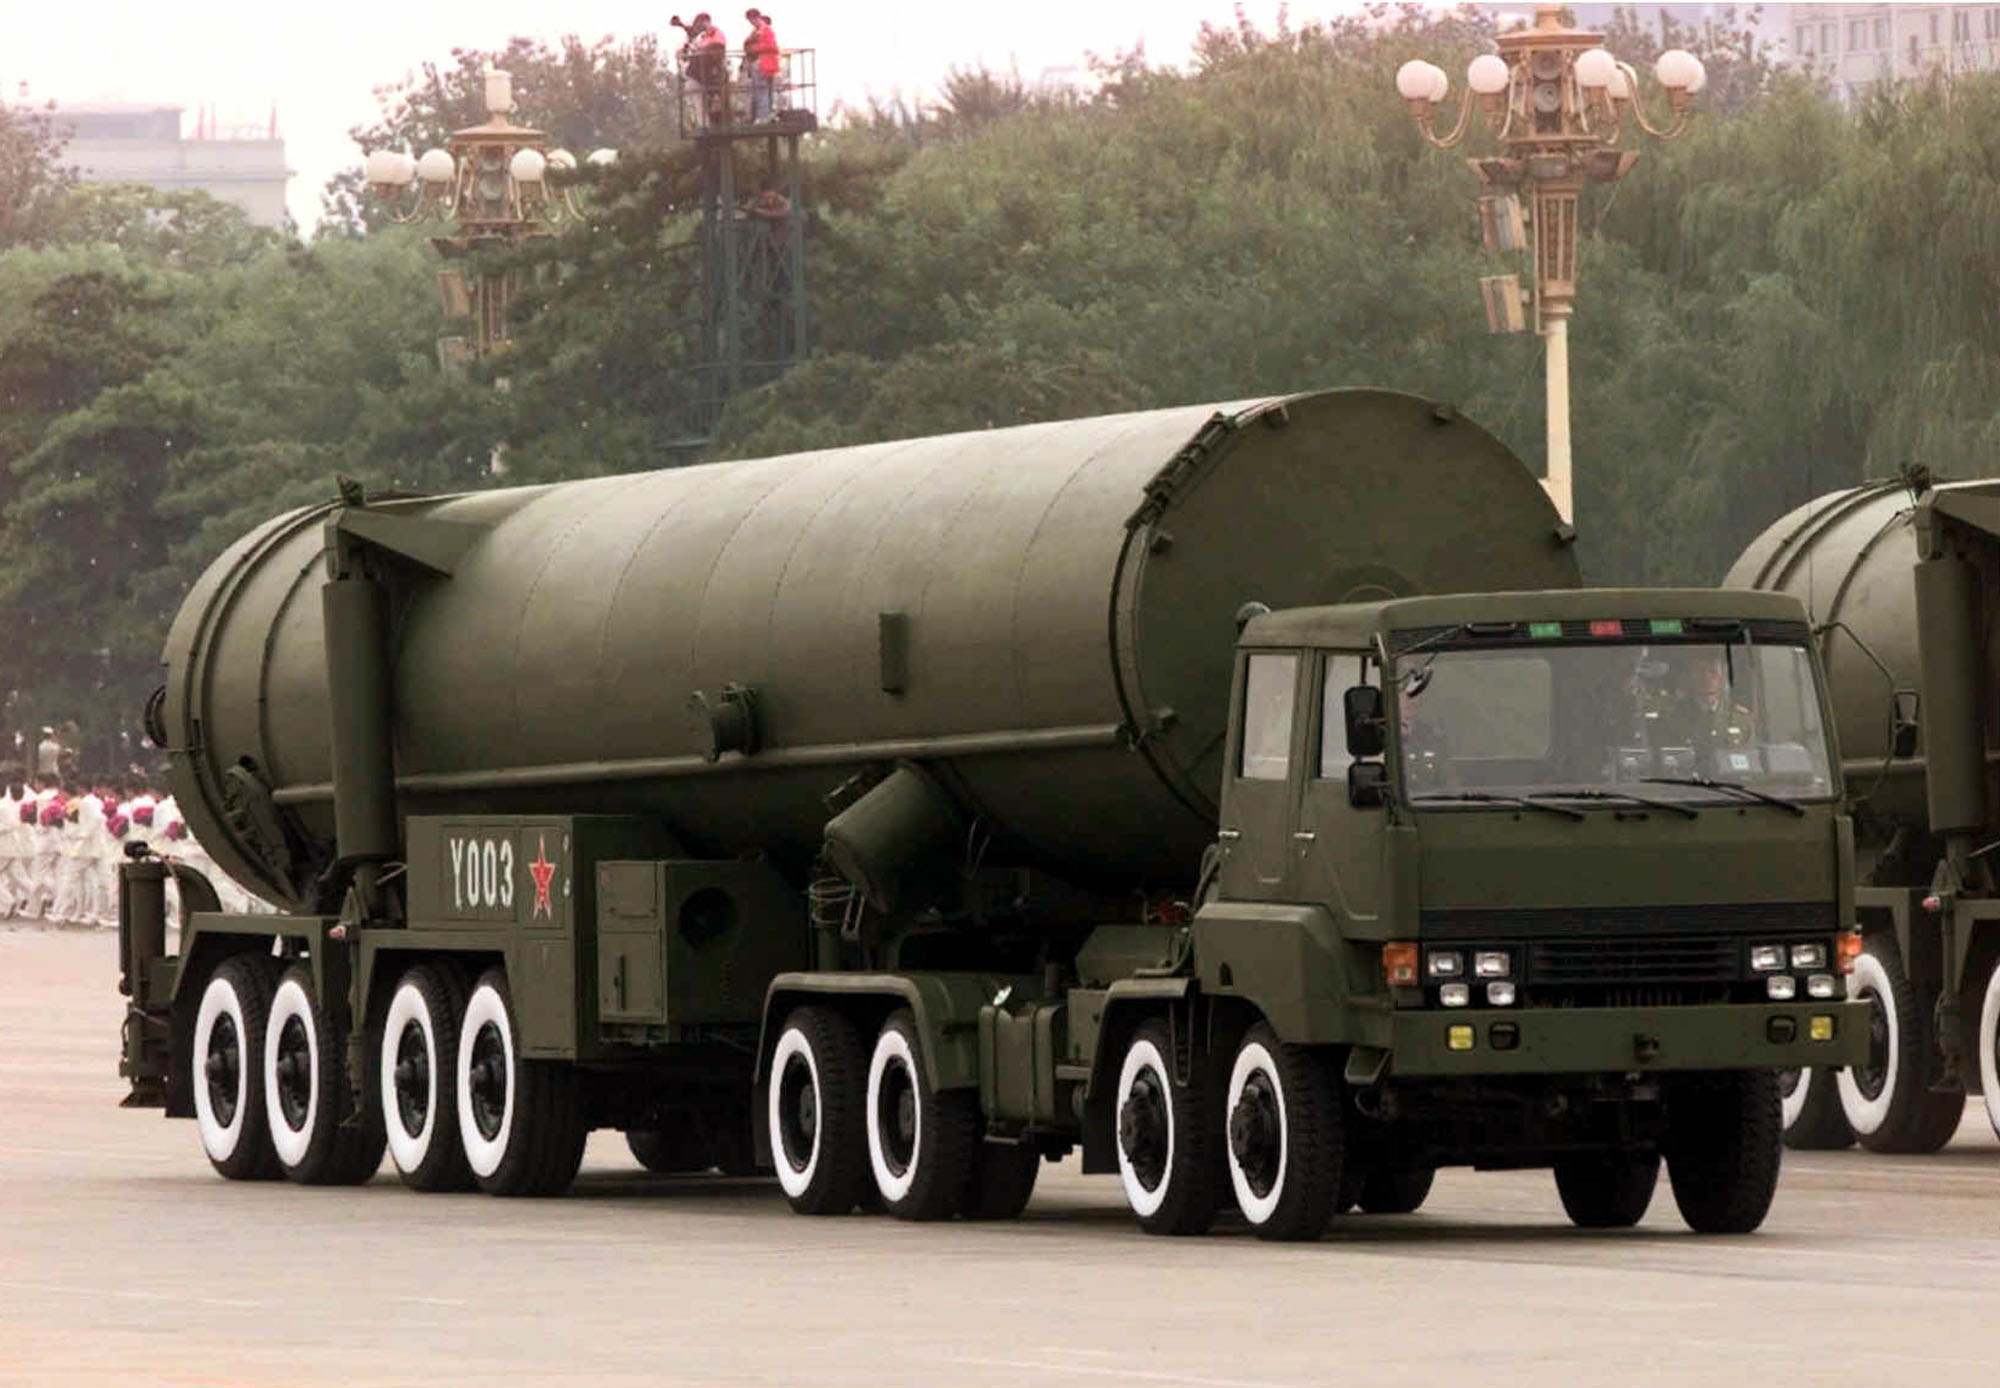 Dongfeng 41 nuclear missile